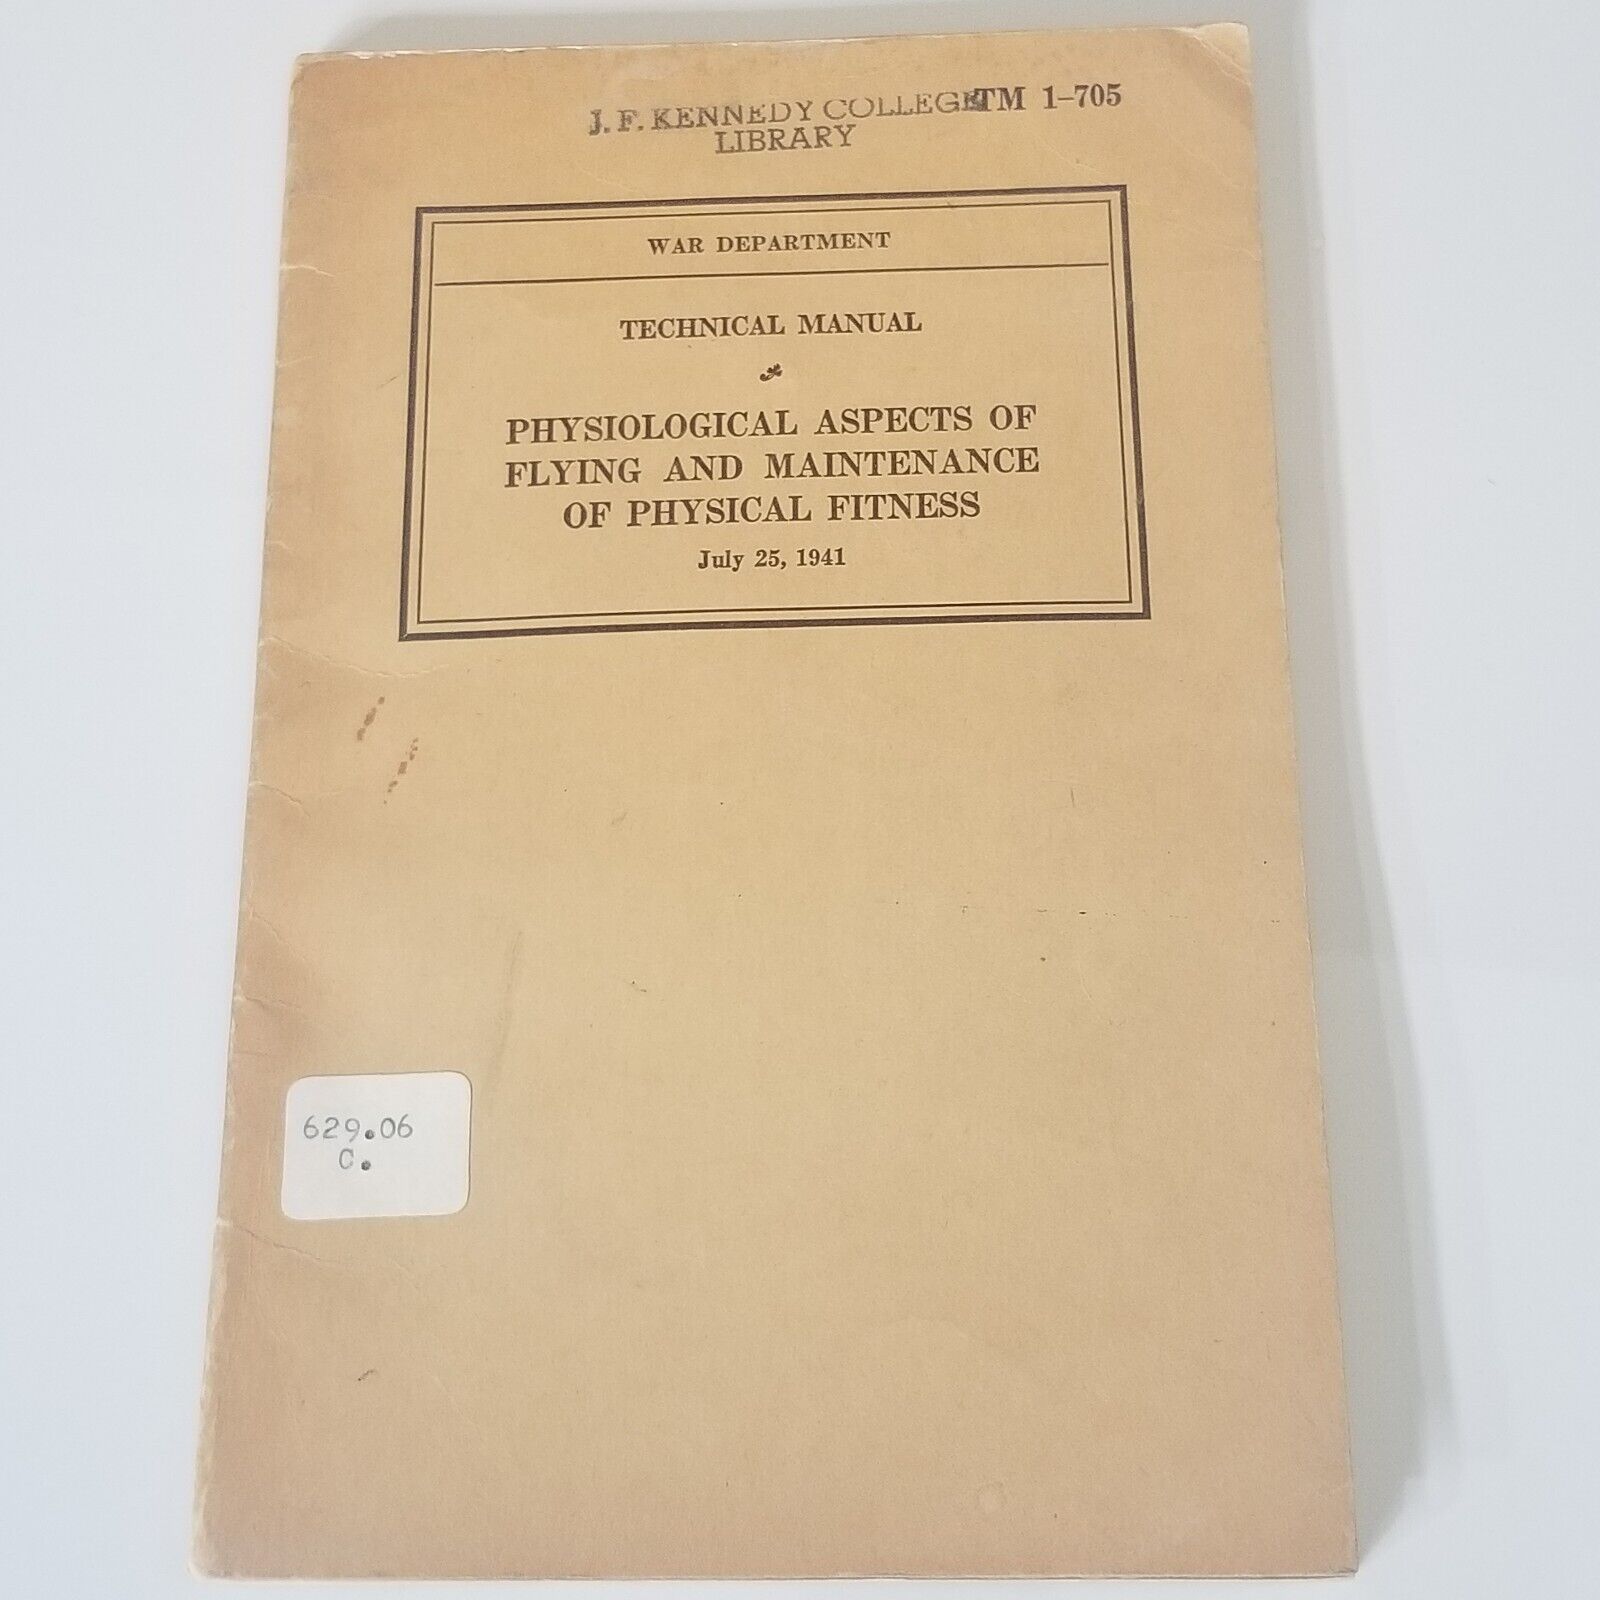 Vintage 1941 War Department Technical Manual Physiological Aspects Of Flying